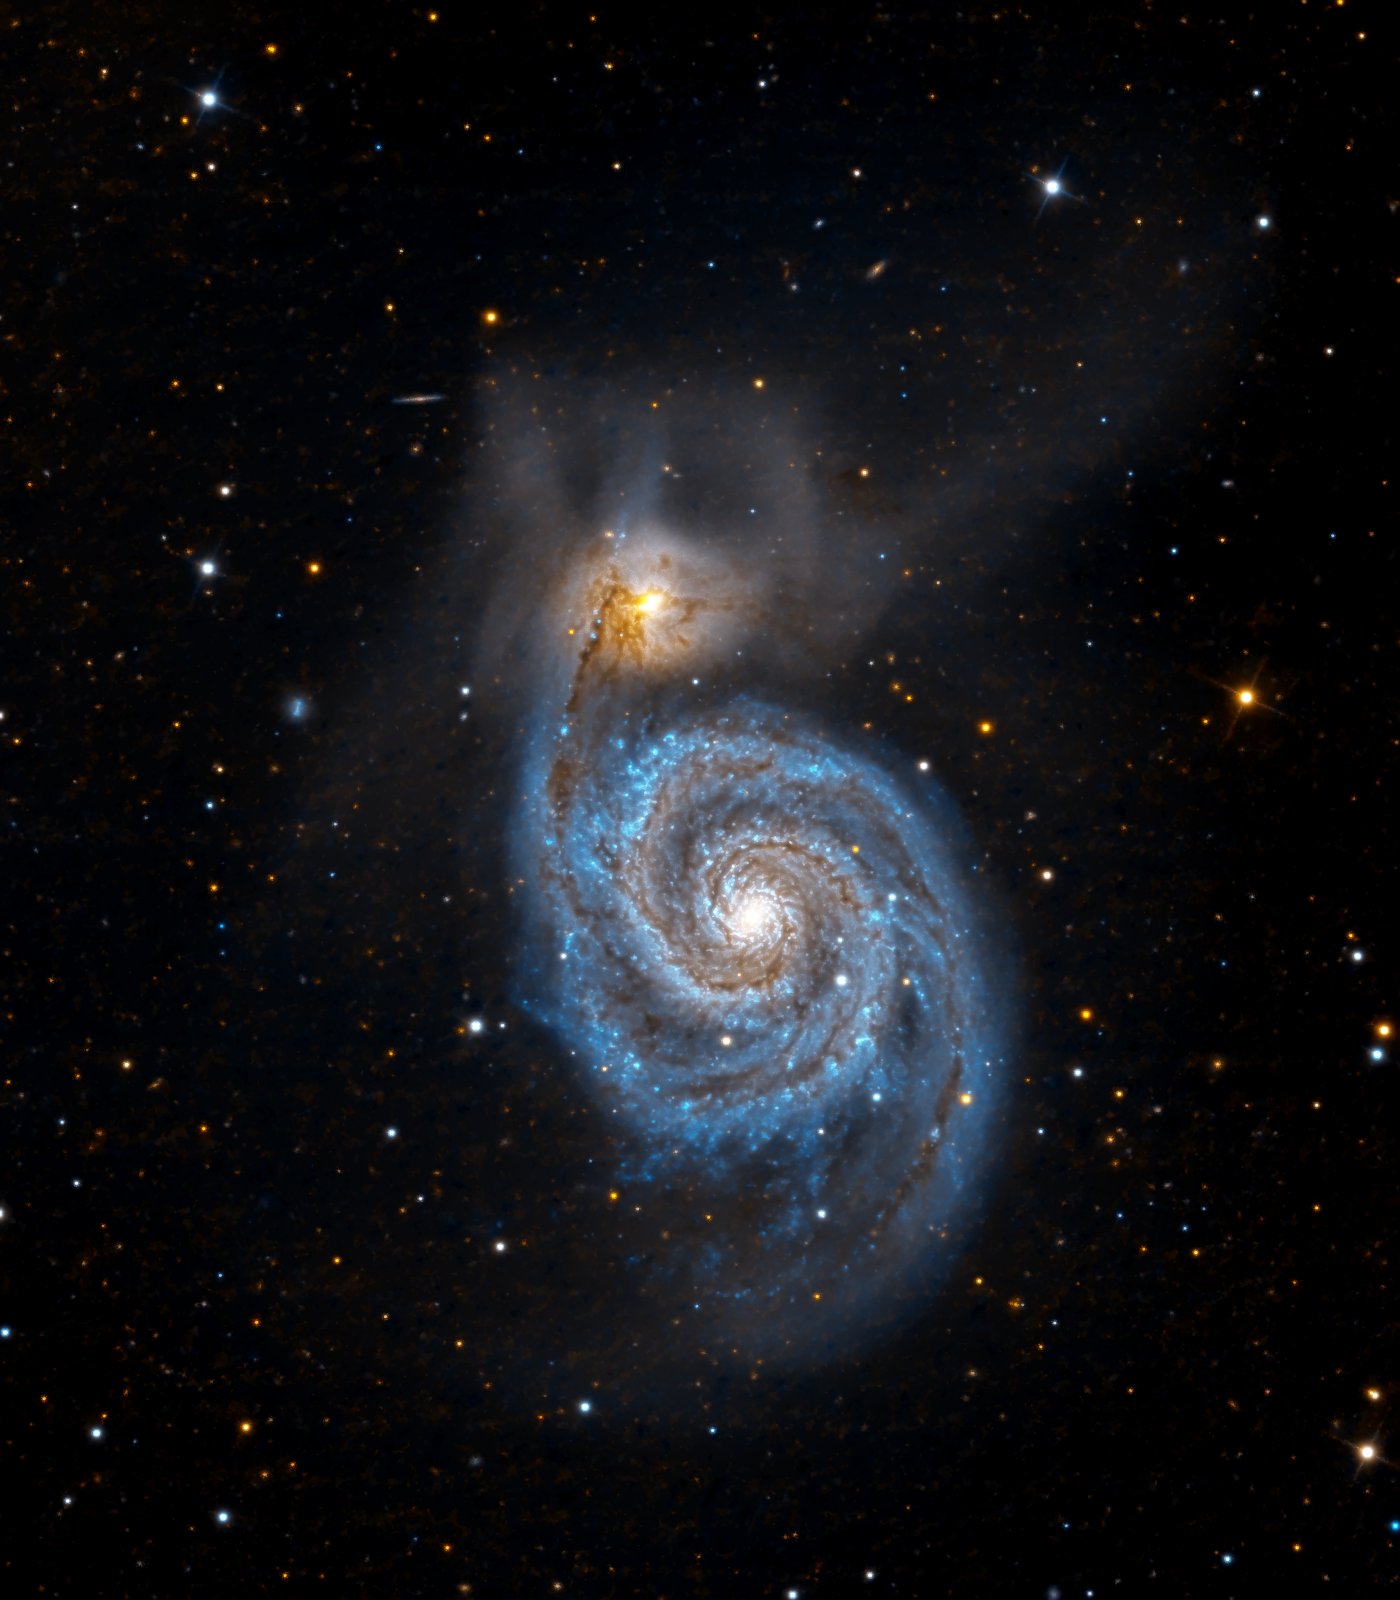 M51 (NGC 5194 and NGC 5195, Whirlpool Galaxy) in continuum light